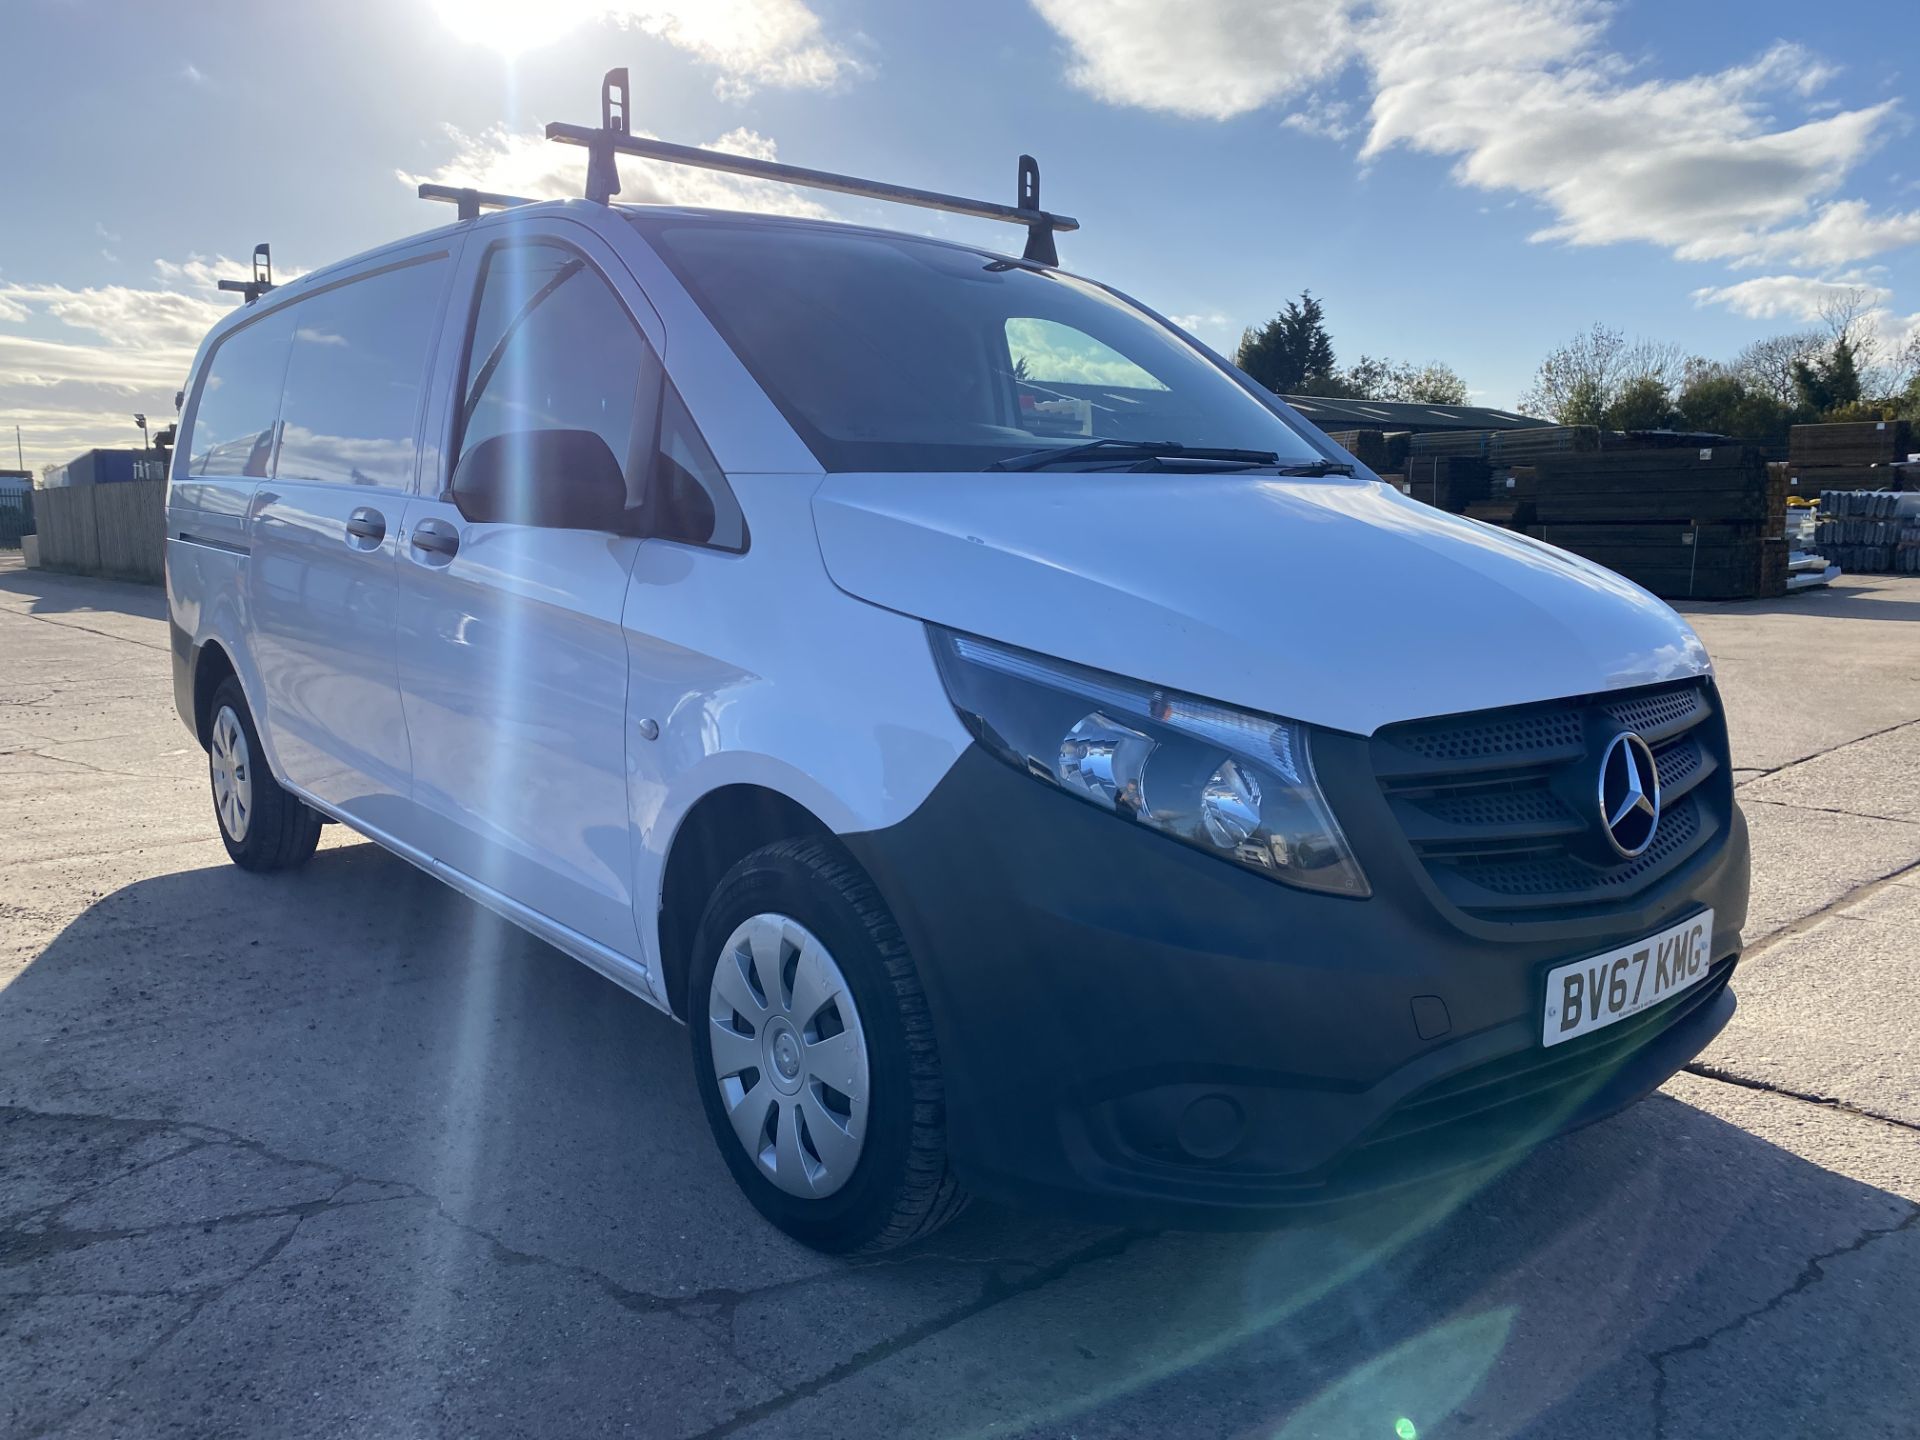 ON SALE MERCEDES VITO 114CDI BLUETEC "LWB" (EURO 6) 2018 MODEL - AIR CON - 1 KEEPER - LOOK!! - Image 5 of 19